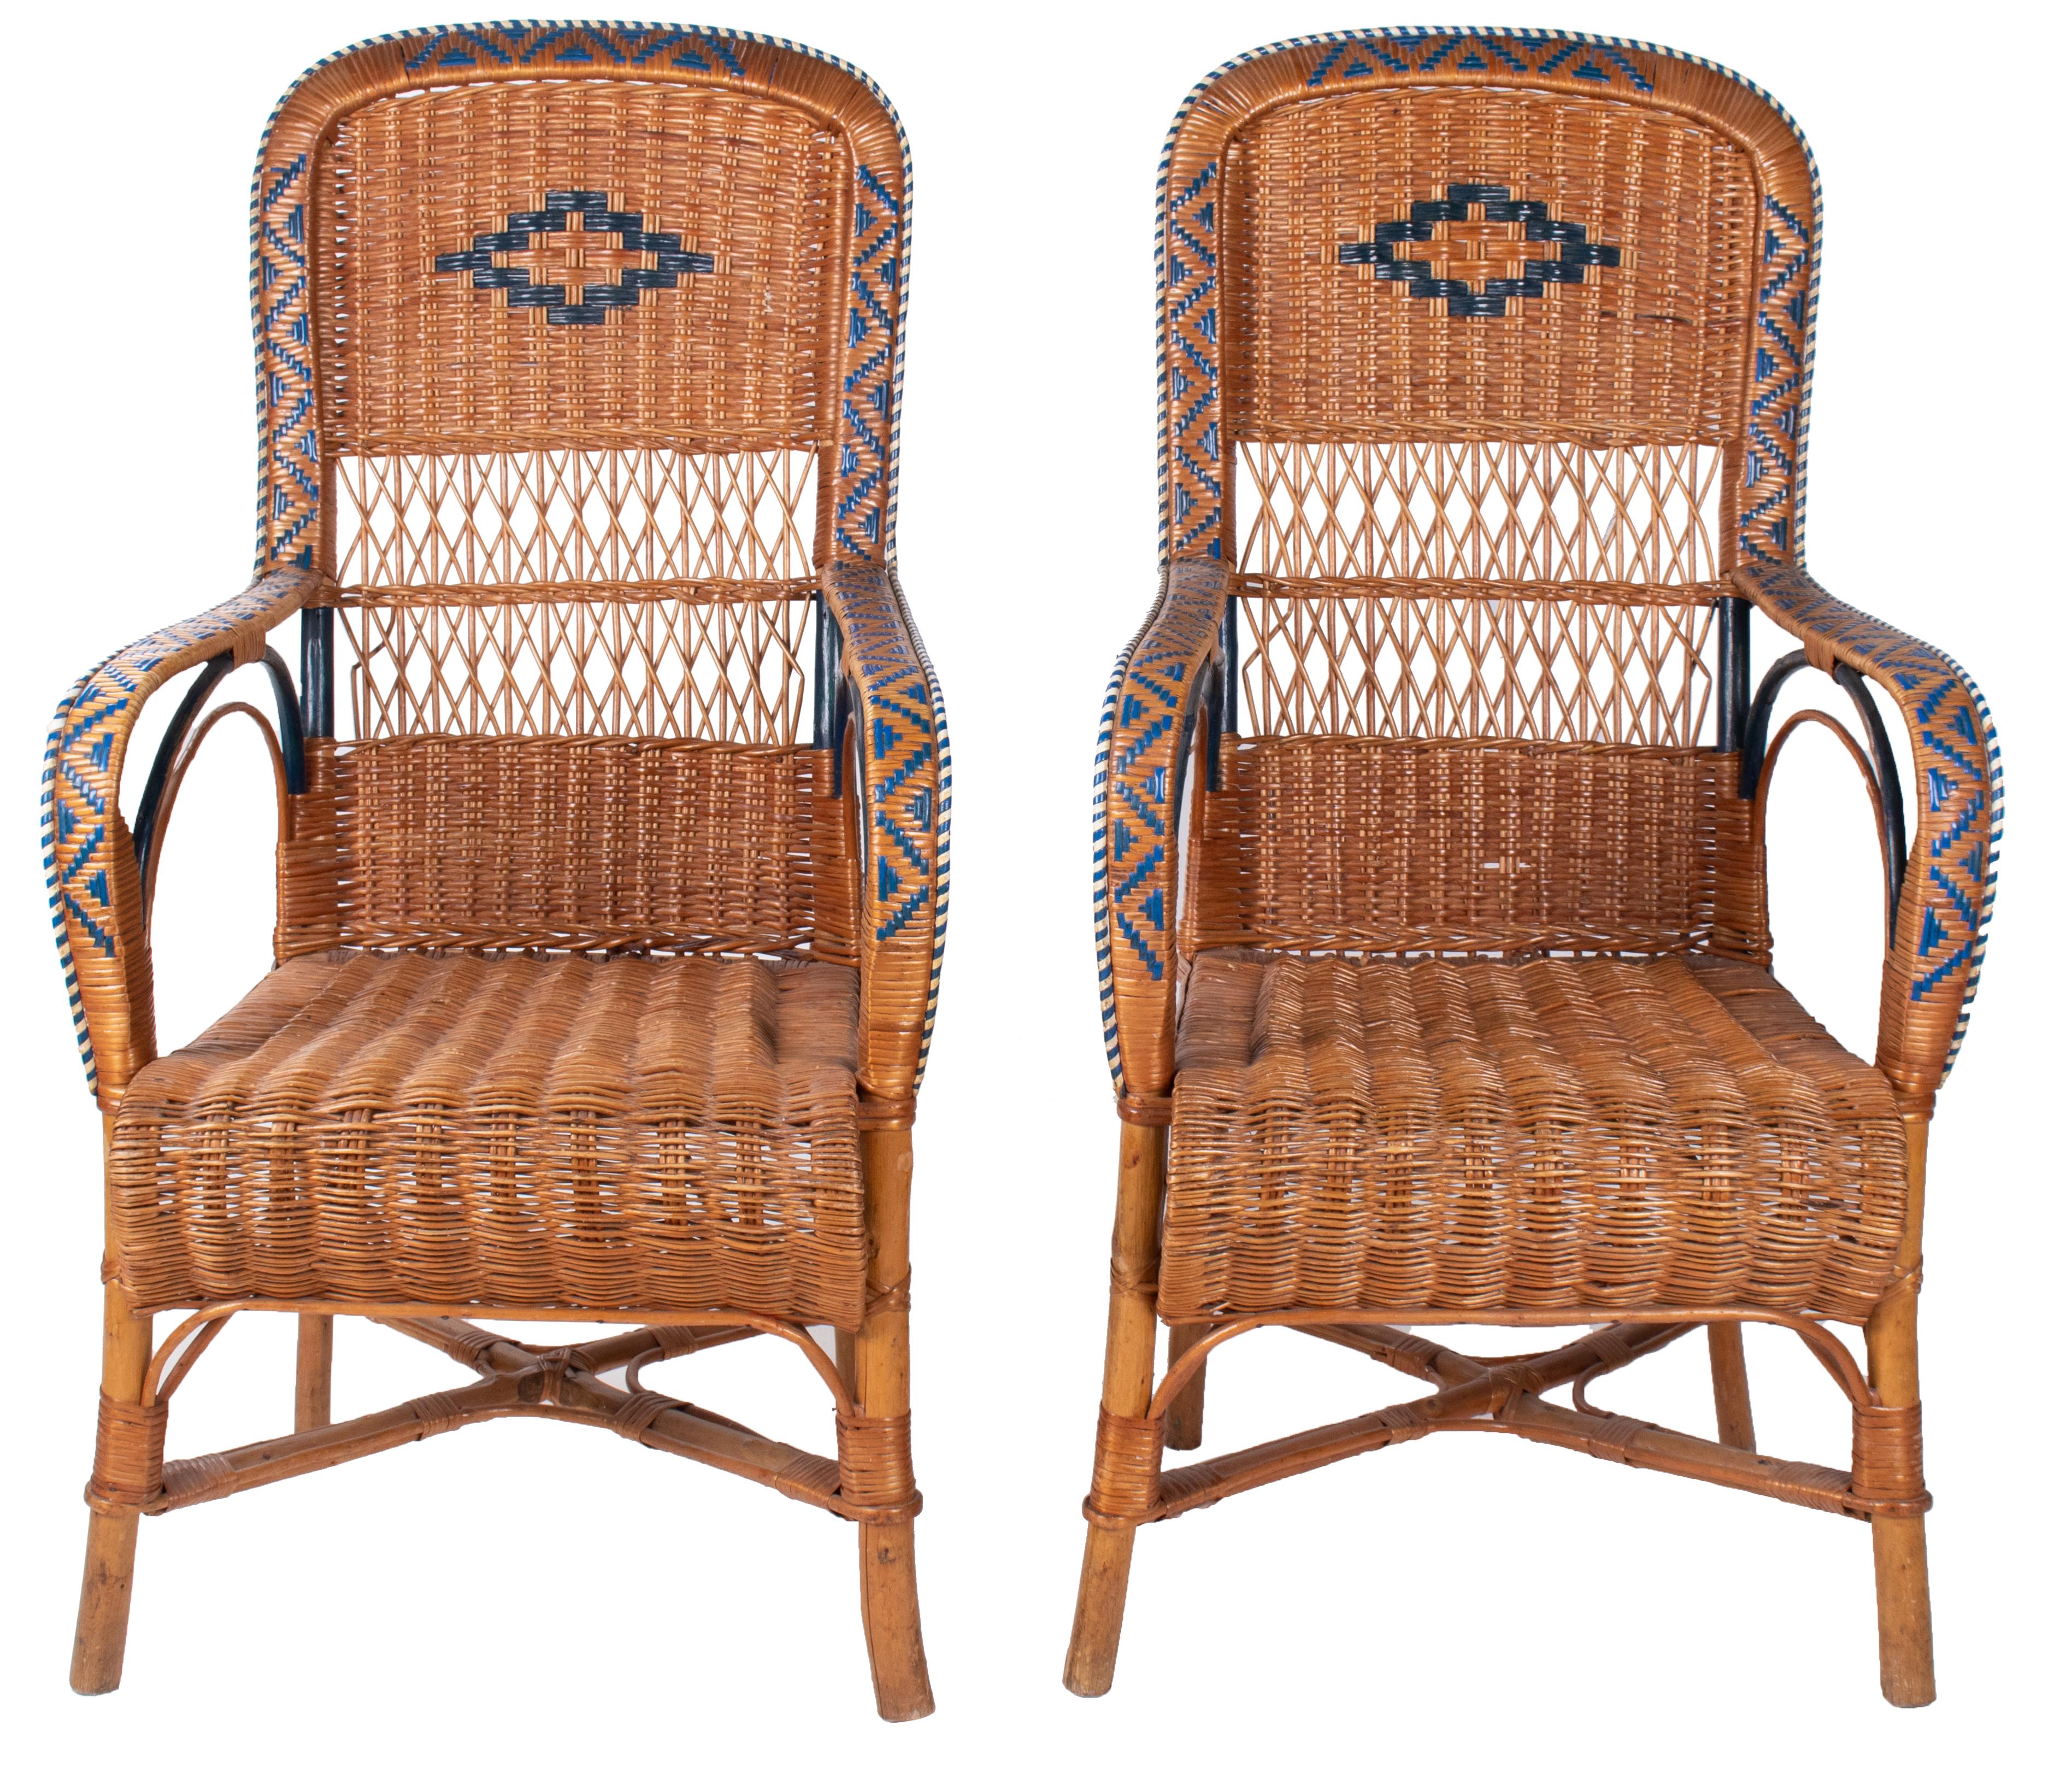 1970s Spanish pair of wicker and wood armchairs, decorated with geometric motifs using colourful stained wicker, particularly on back and armrests.